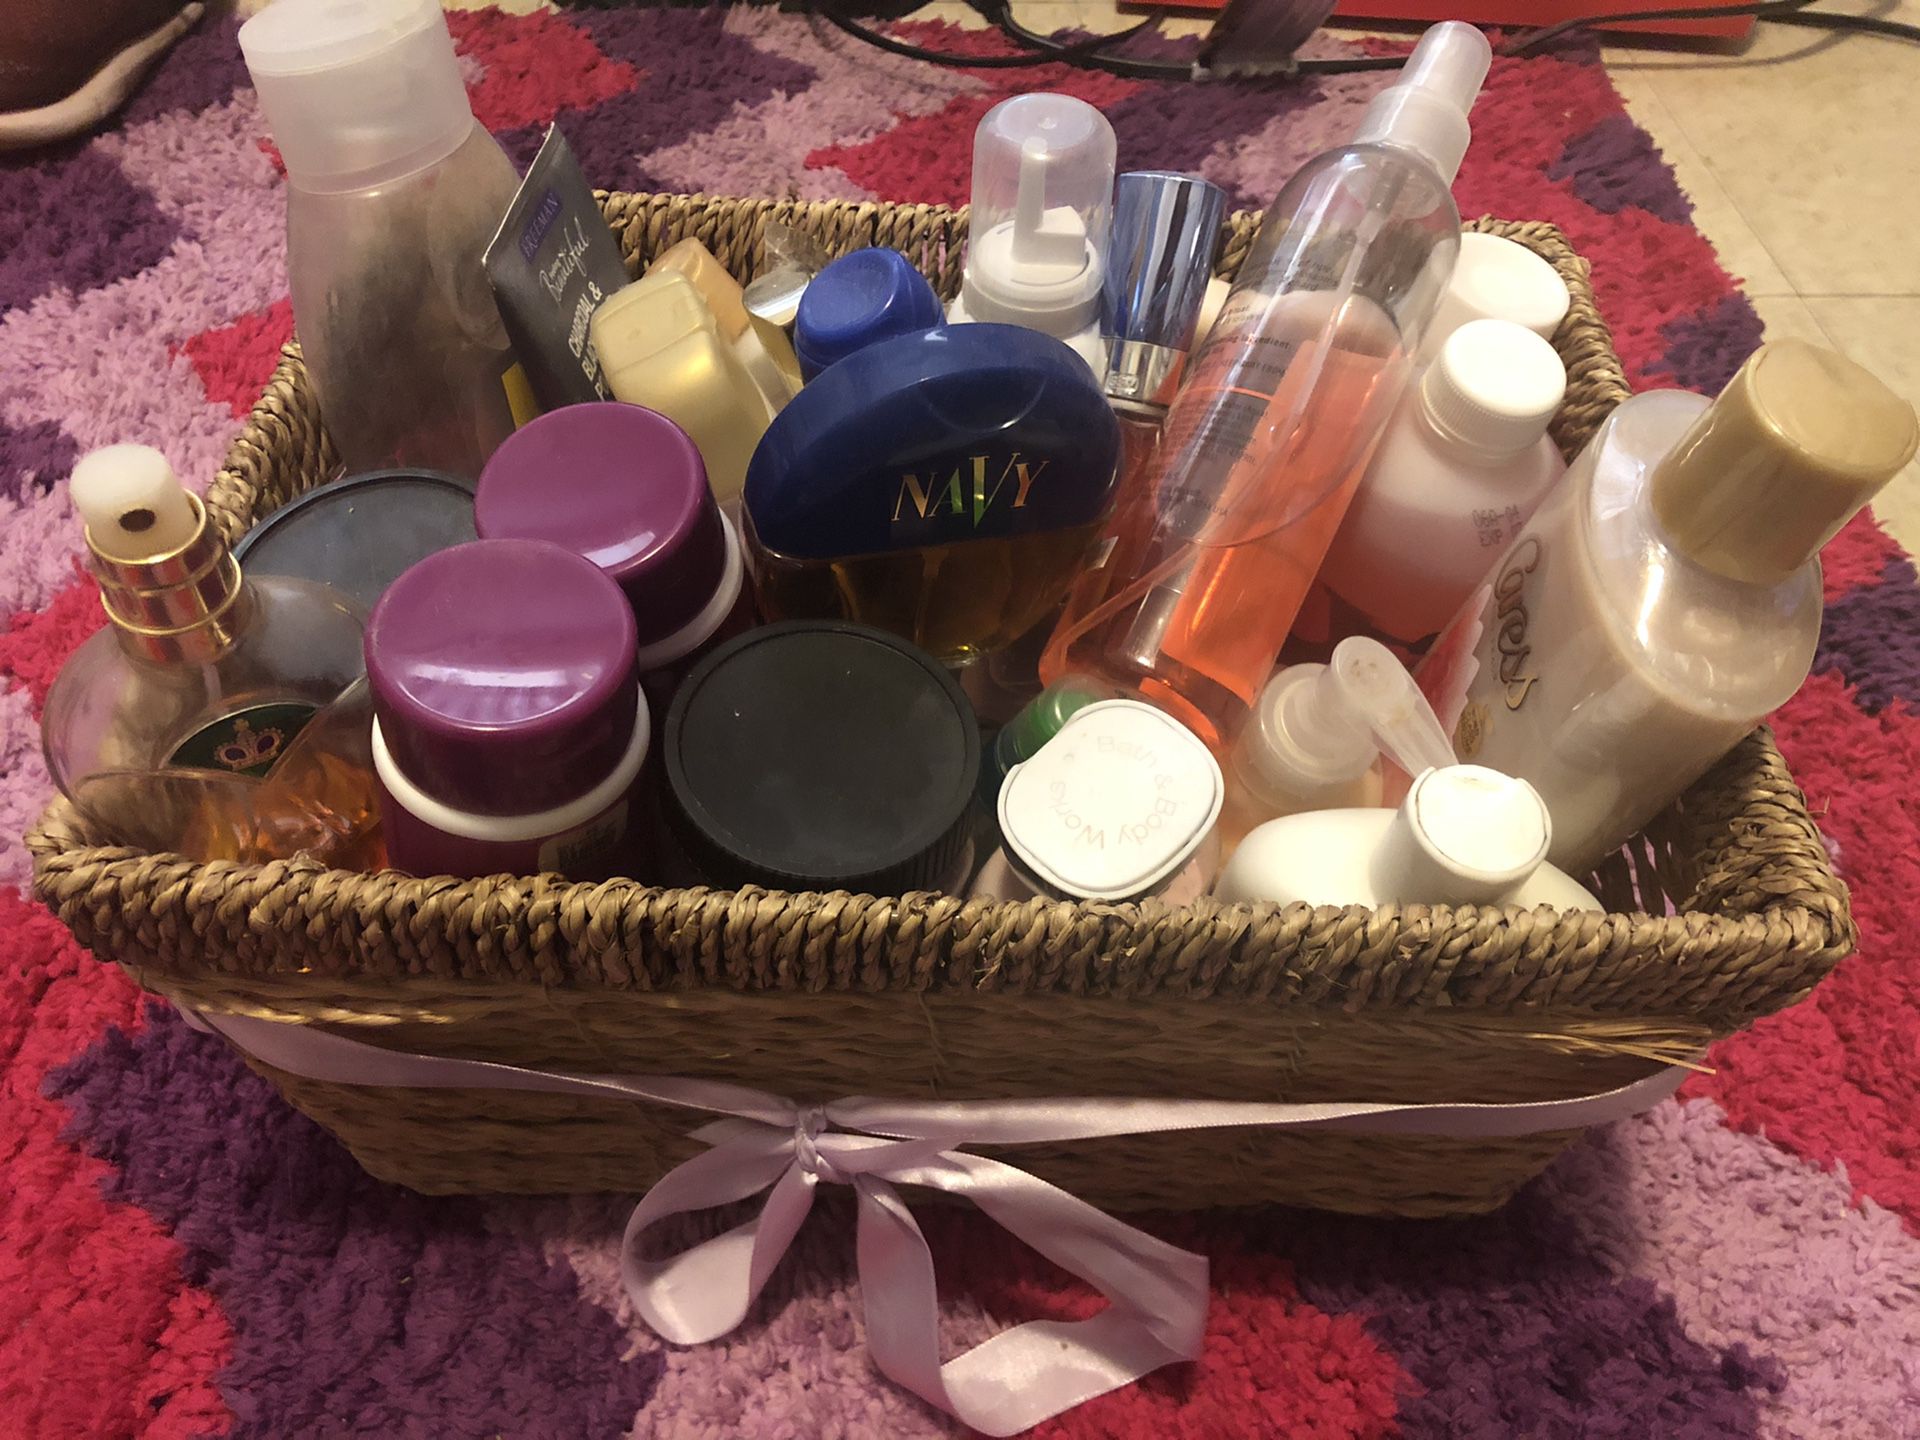 Basket of Misc. Beauty Items